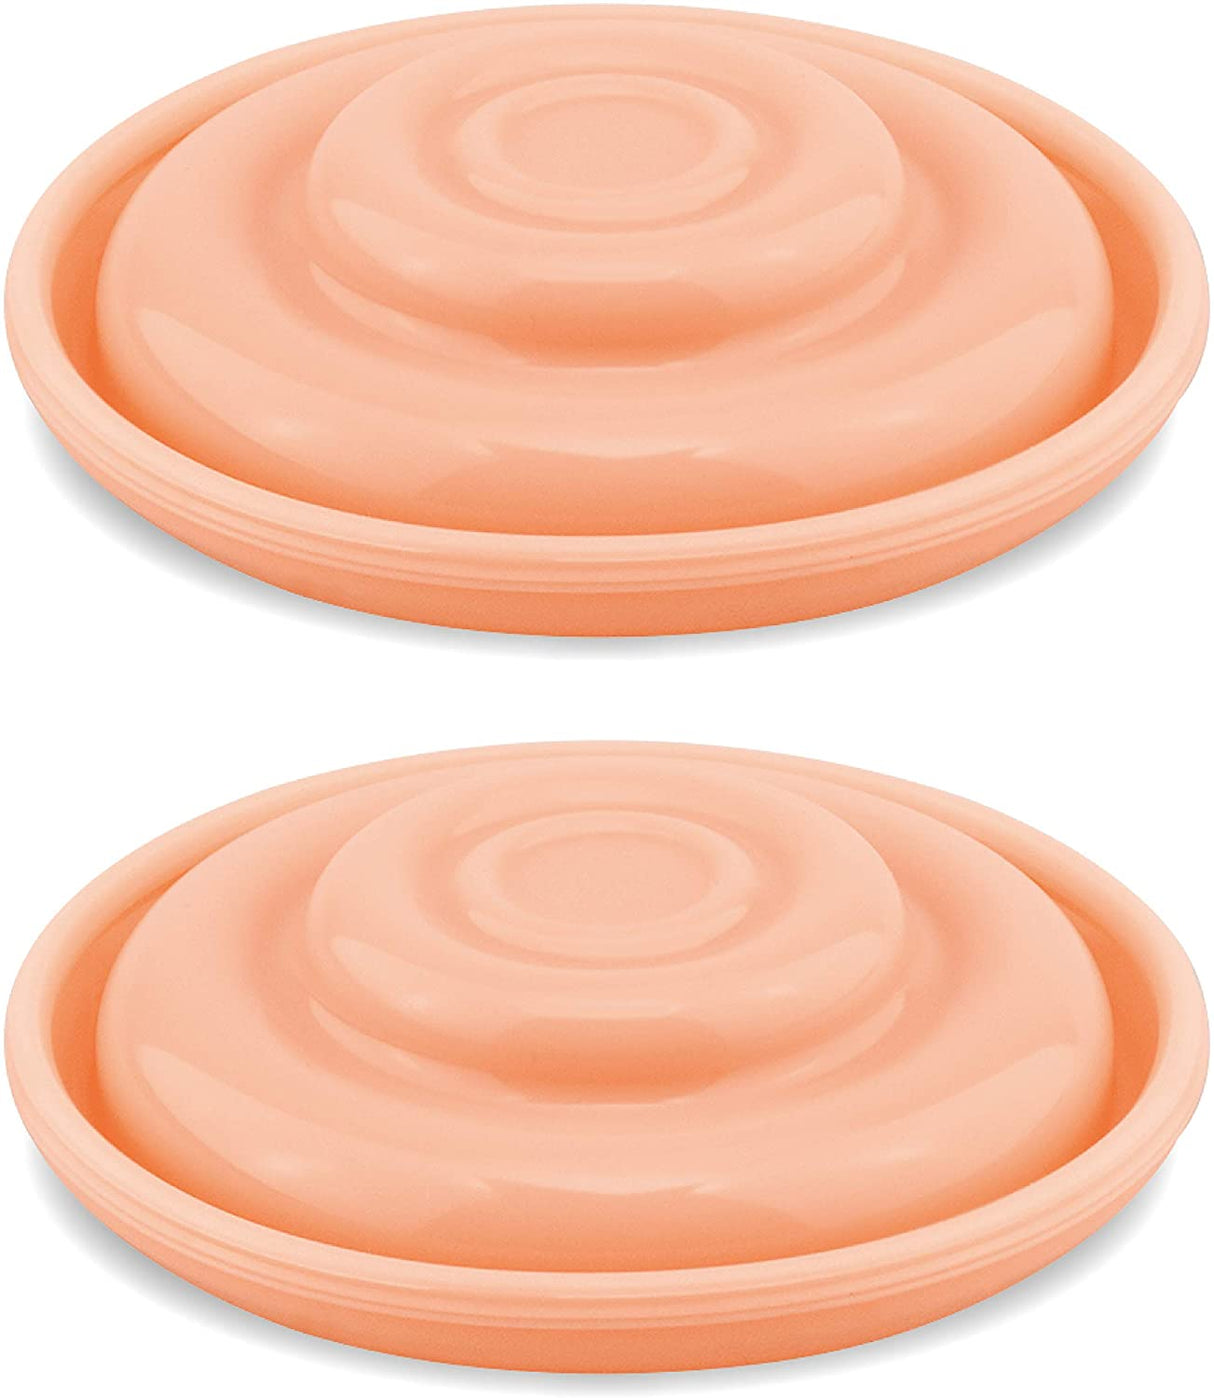 Silicone Membrane; Designed for Spectra S1 Spectra S2, 9 Plus Backflow Protector and Maymom Backflow Protectors  Maymom Orange  